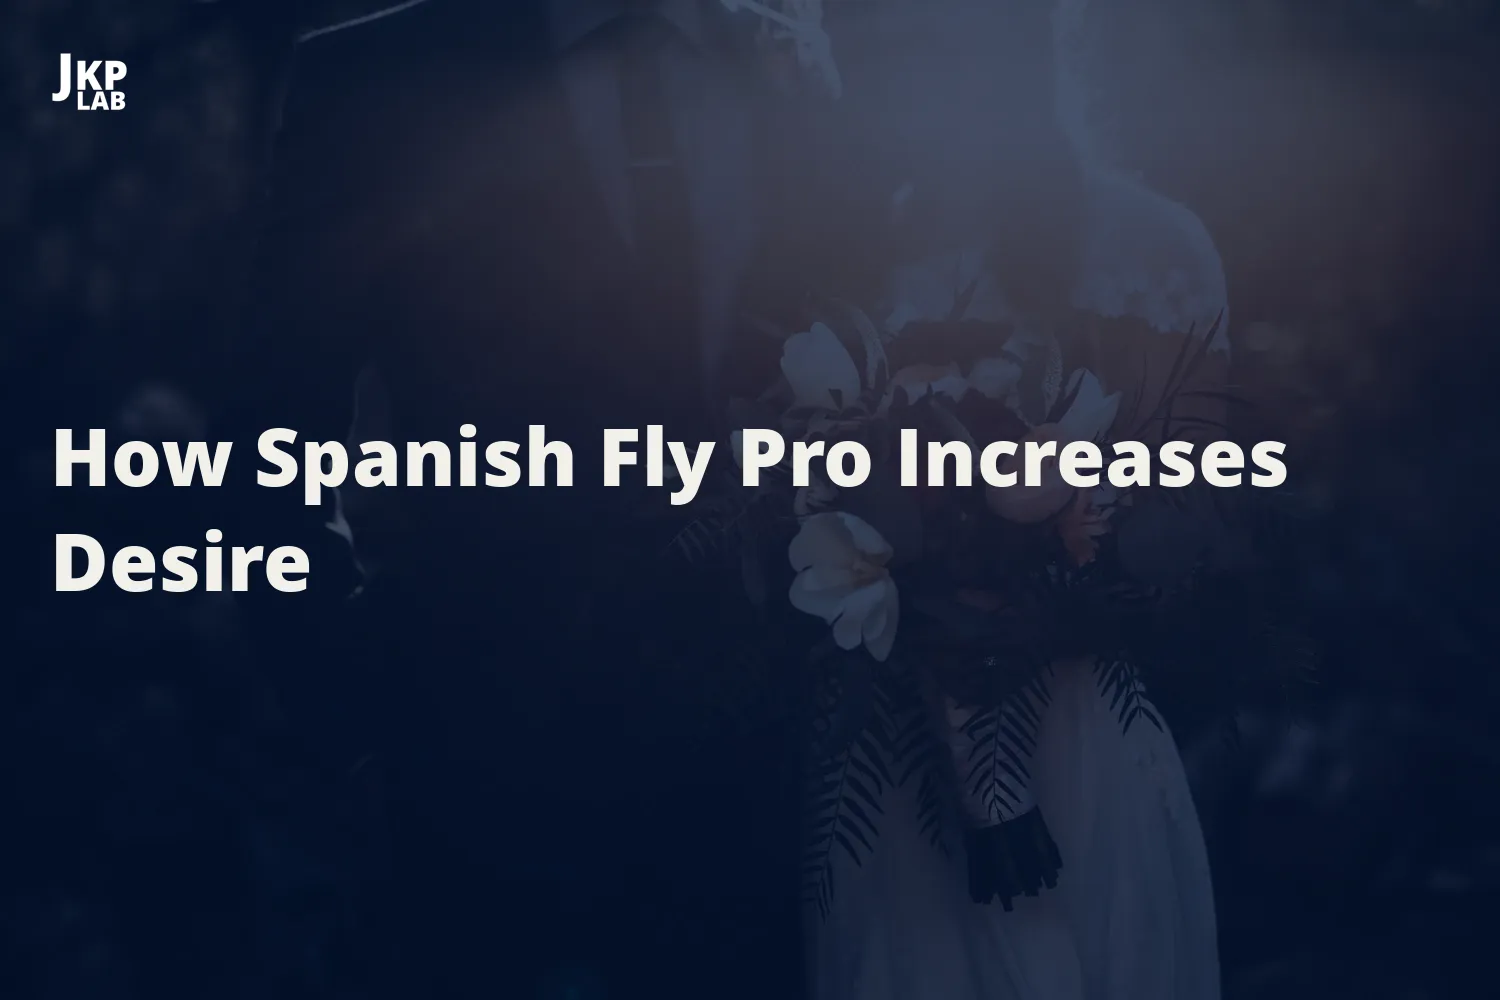 Combining Spanish Fly with Other Enhancers